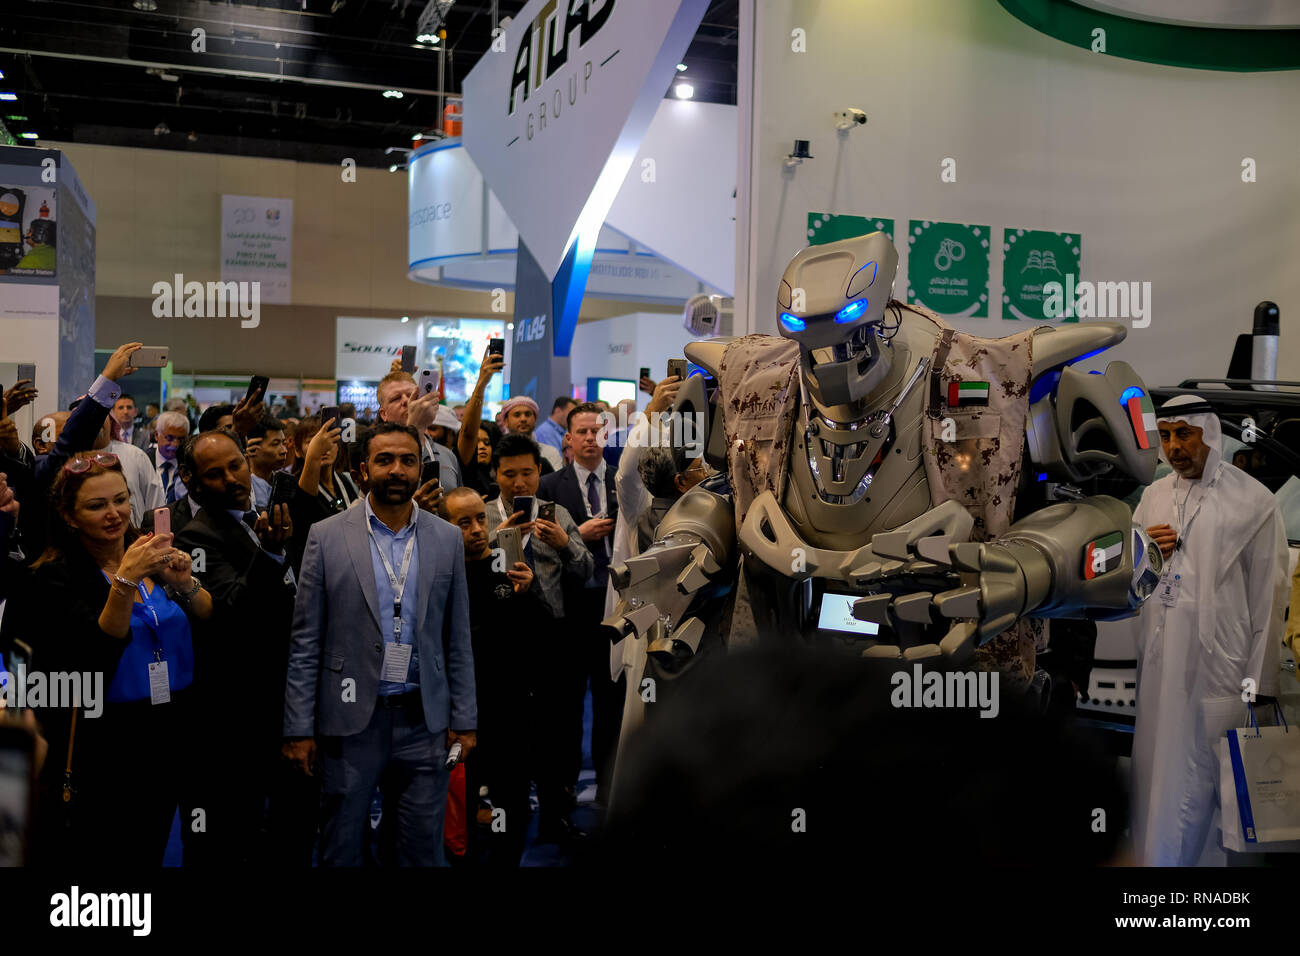 Abu Dhabi, UAE. 18th Feb 2019. IDEX 2019 is being held in ADNEC Abu Dhabi, UAE. IDEX is the only international defence exhibition and conference in the MENA region demonstrating the latest technology across land, sea and air sectors of defence. Credit: Fahd Khan / Live News Alamy Stock Photo